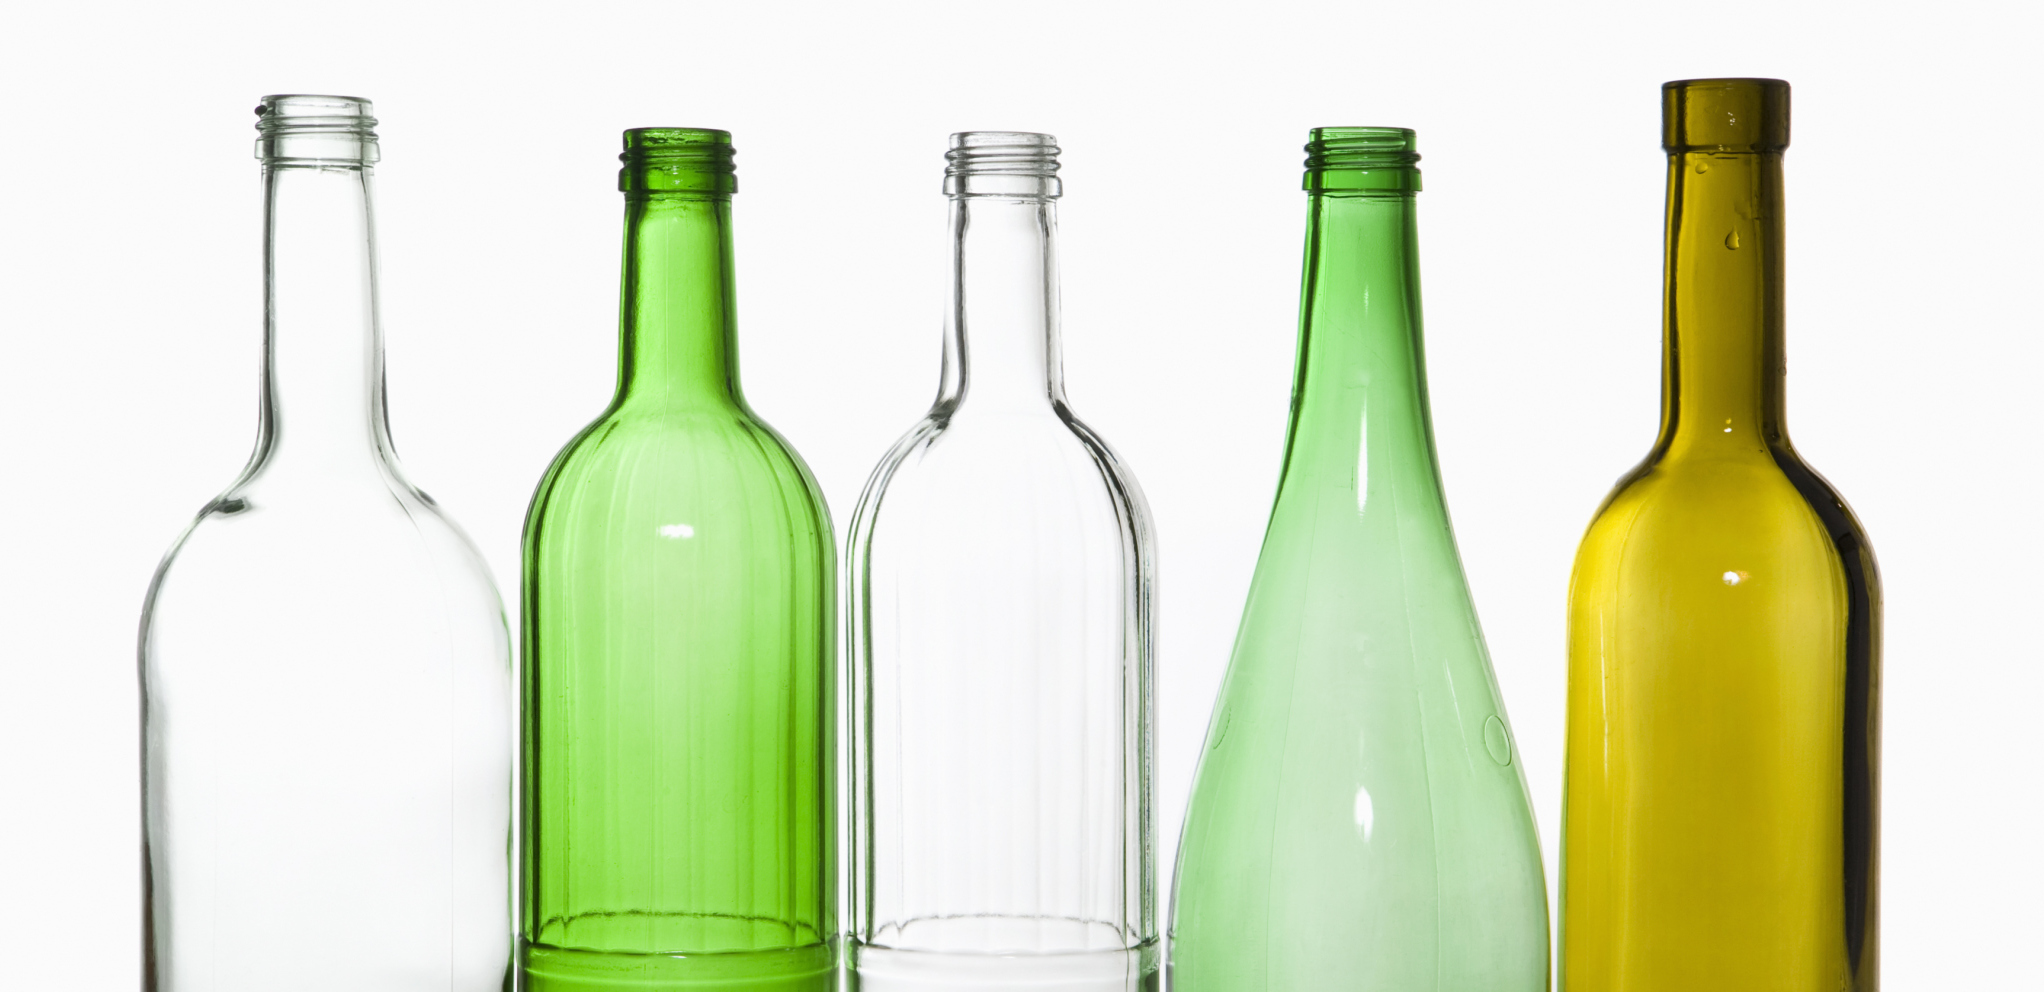 14 Things you never knew you could do with an empty wine bottle